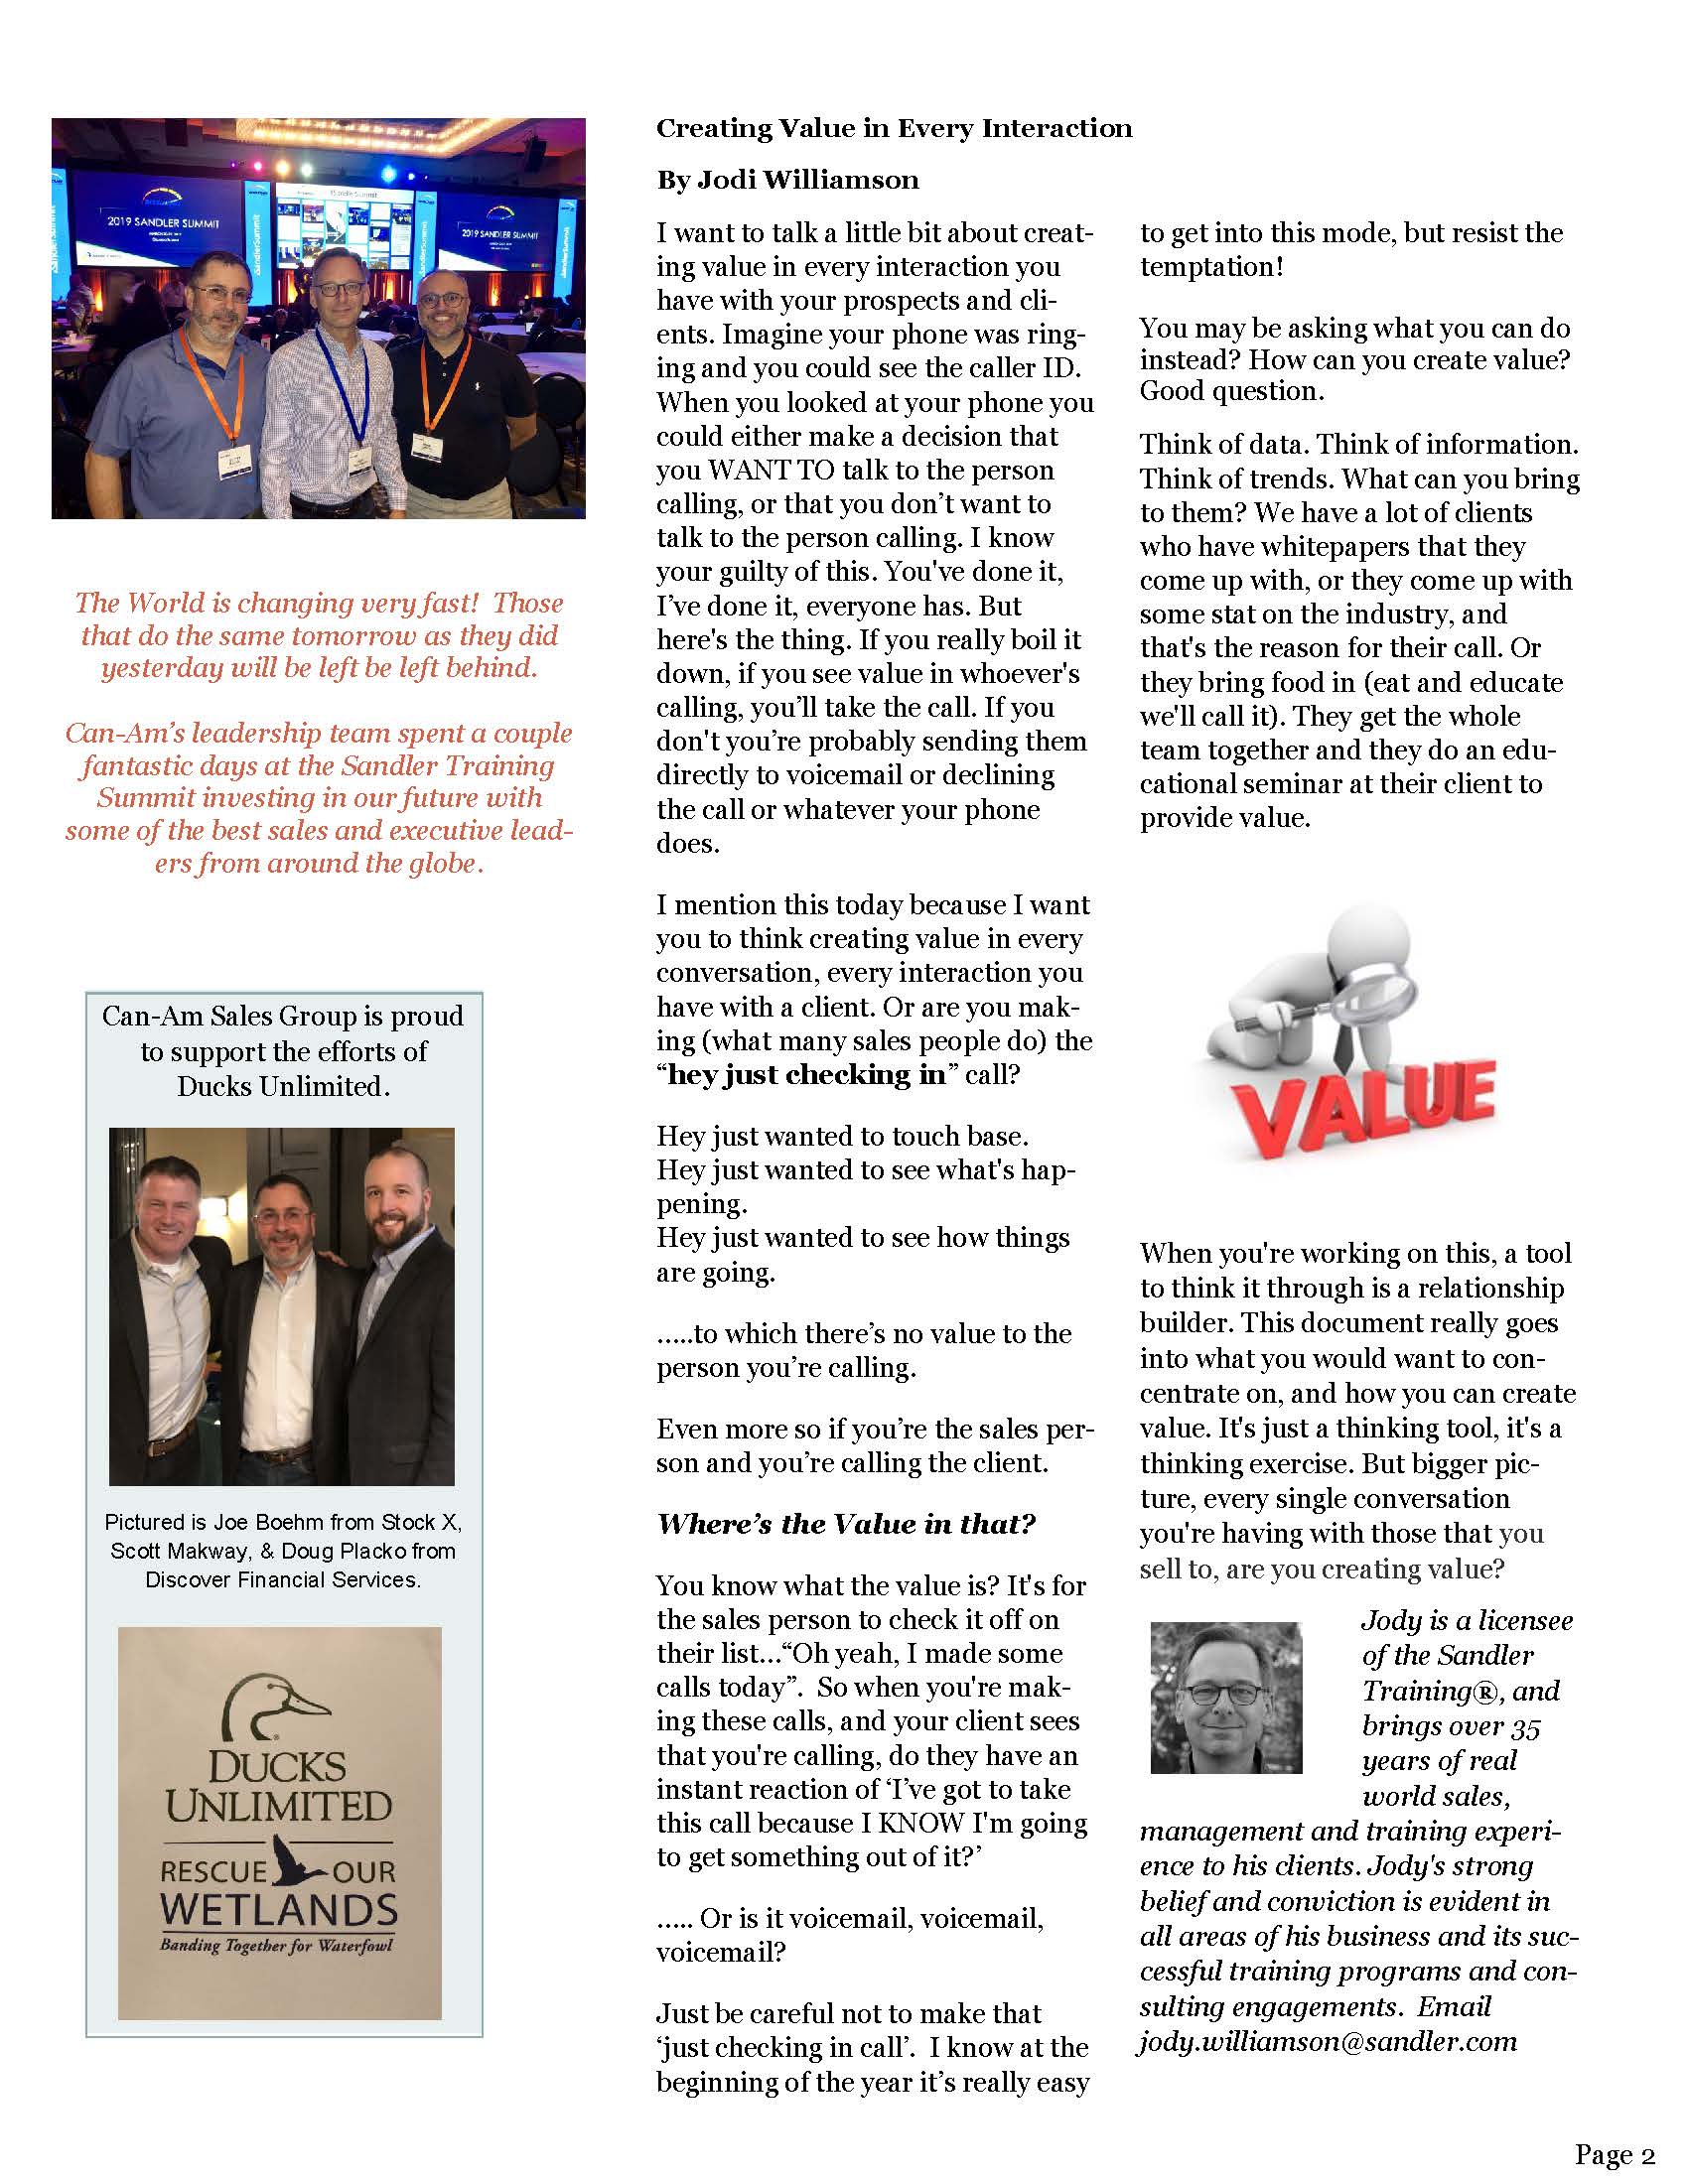 Can-Am Sales Group Newsletter Vol2-page2